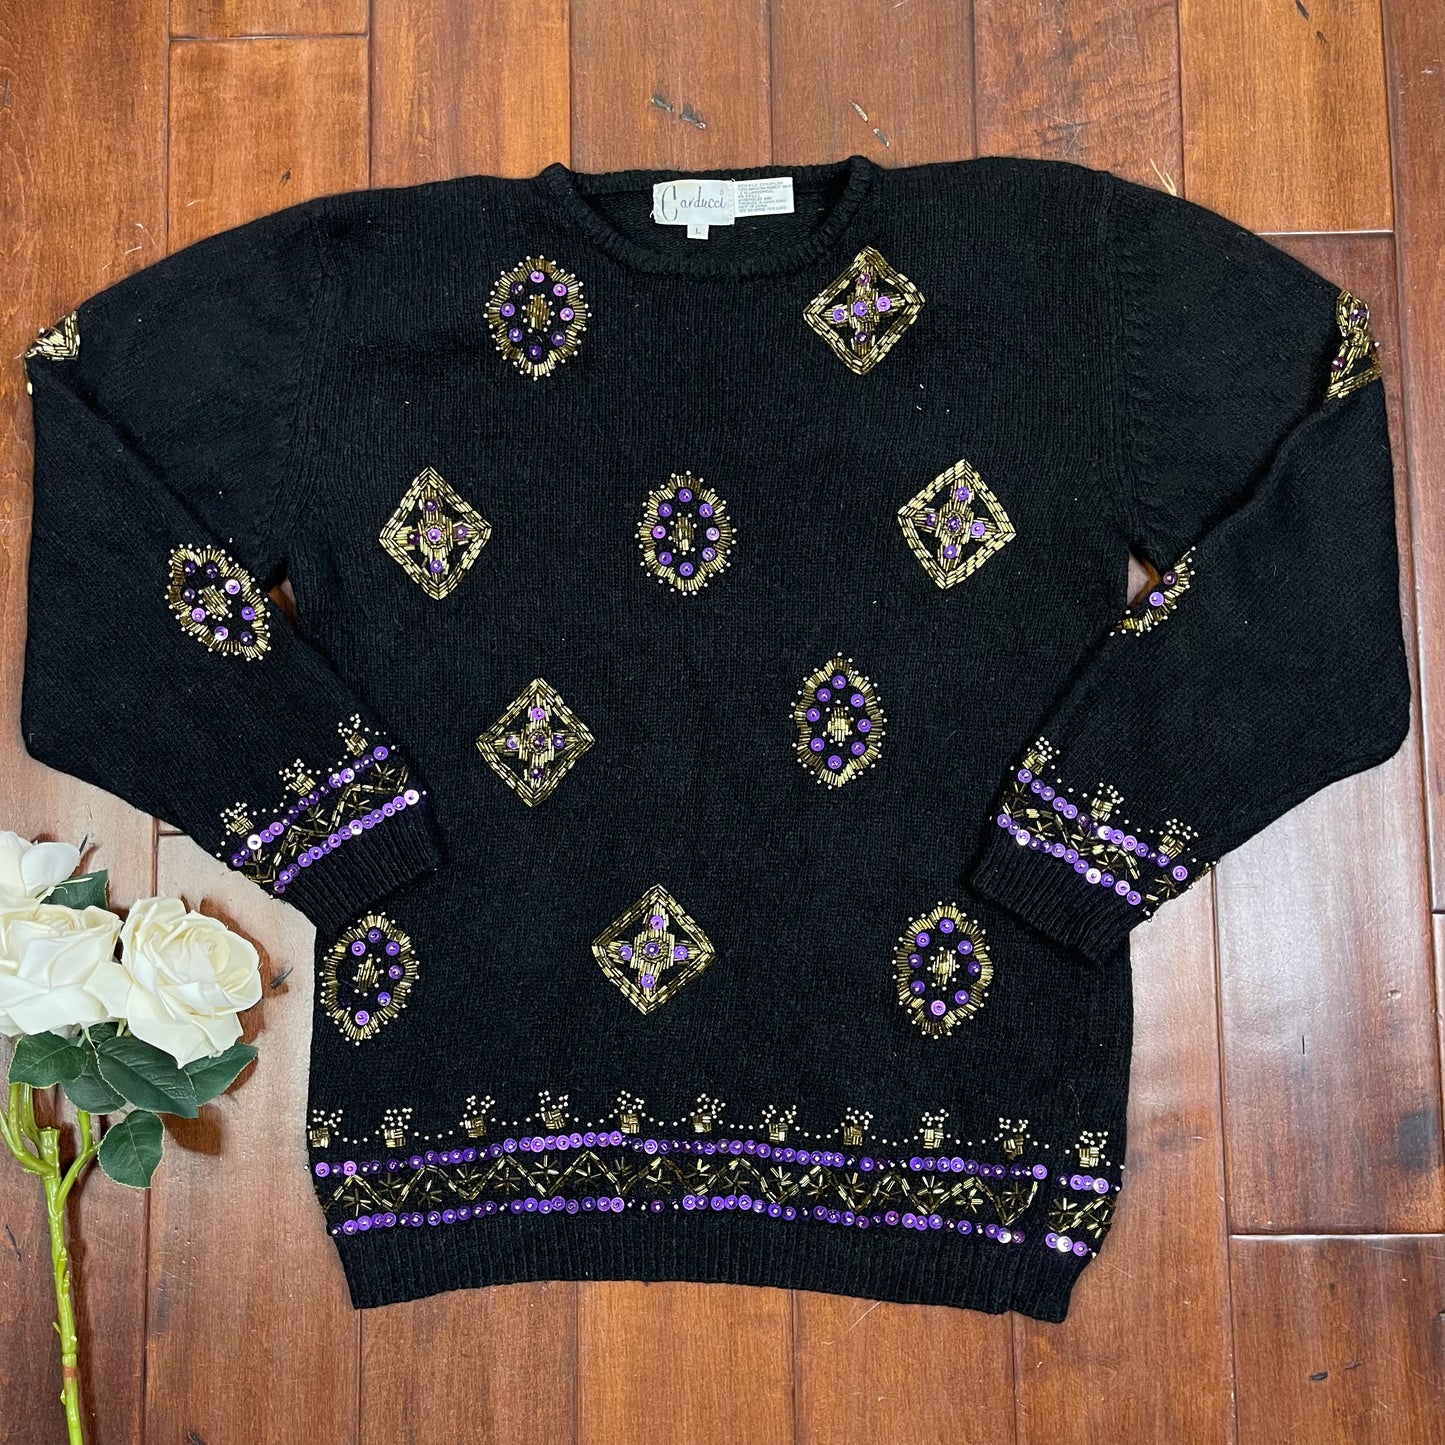 VINTAGE 80’S BEDAZZLED SWEATER